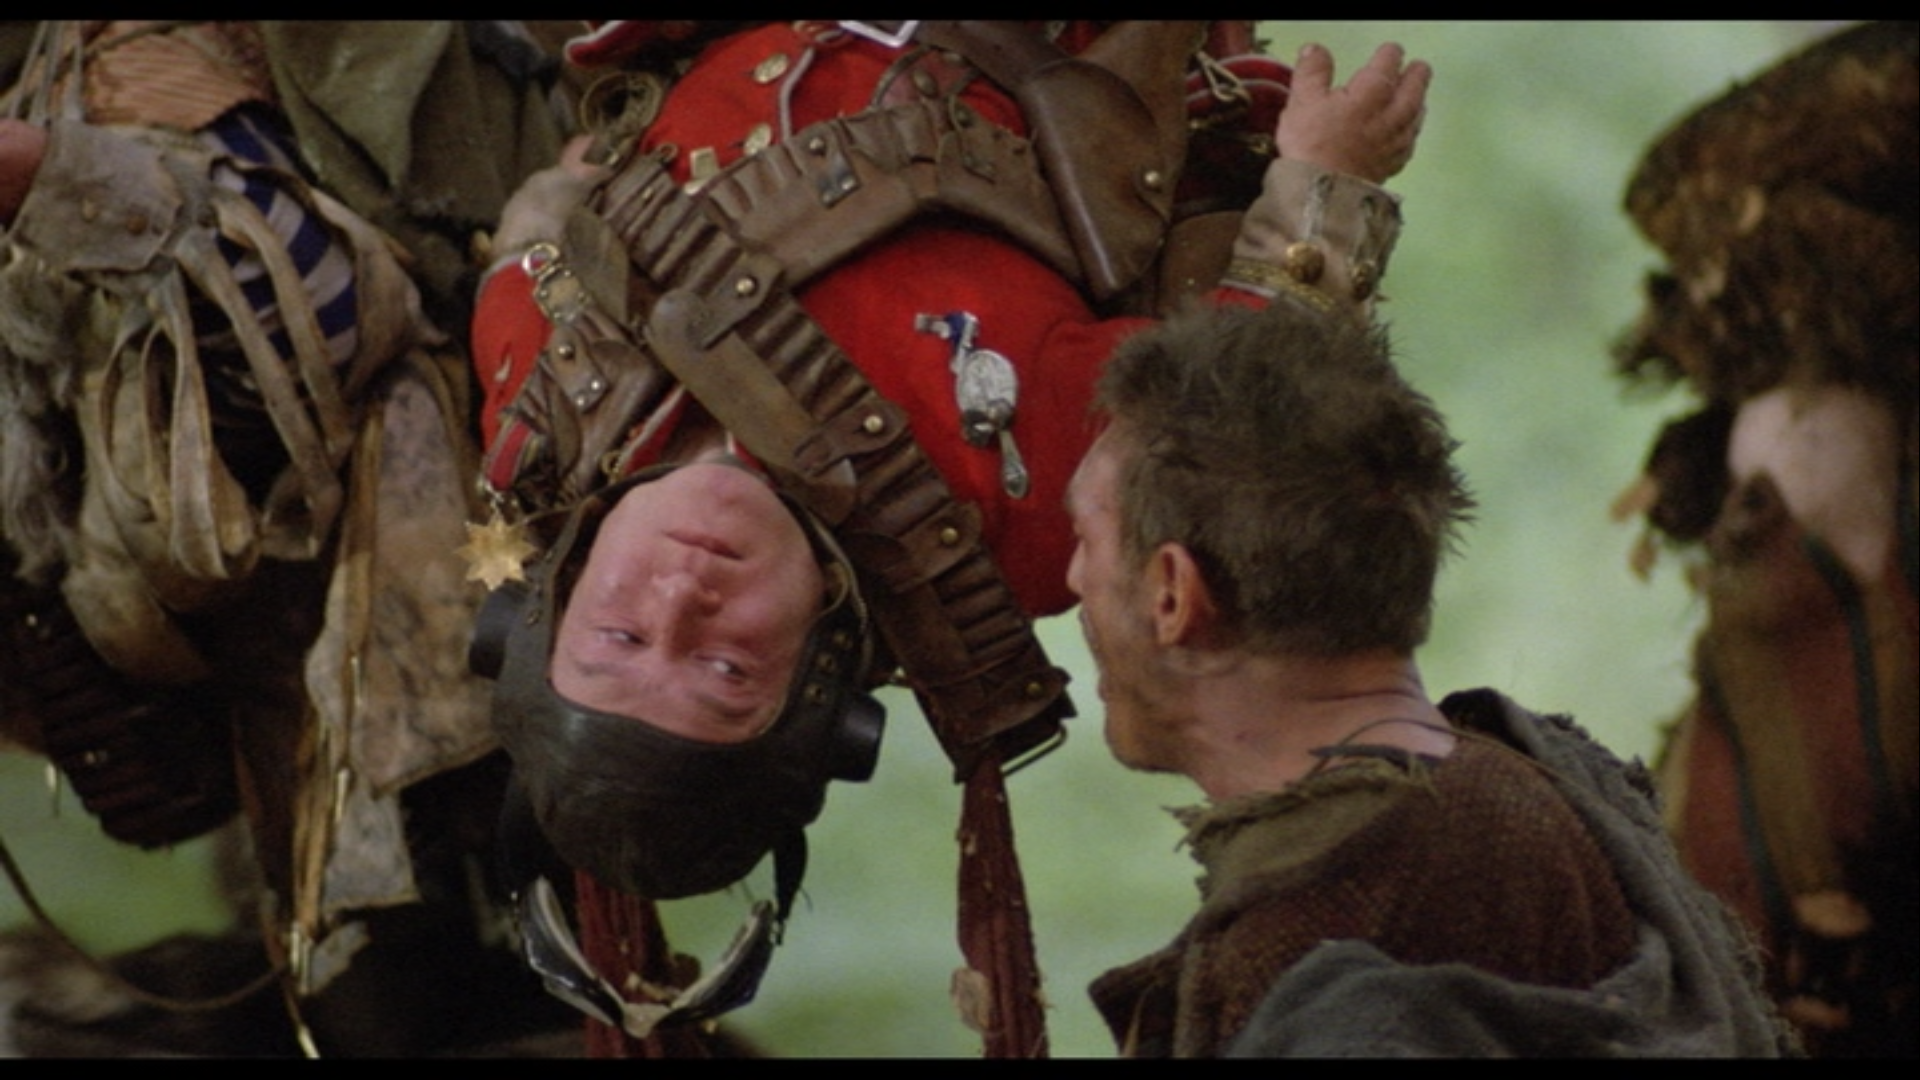 Time Bandits turn 40, and Terry Gilliam celebrates the